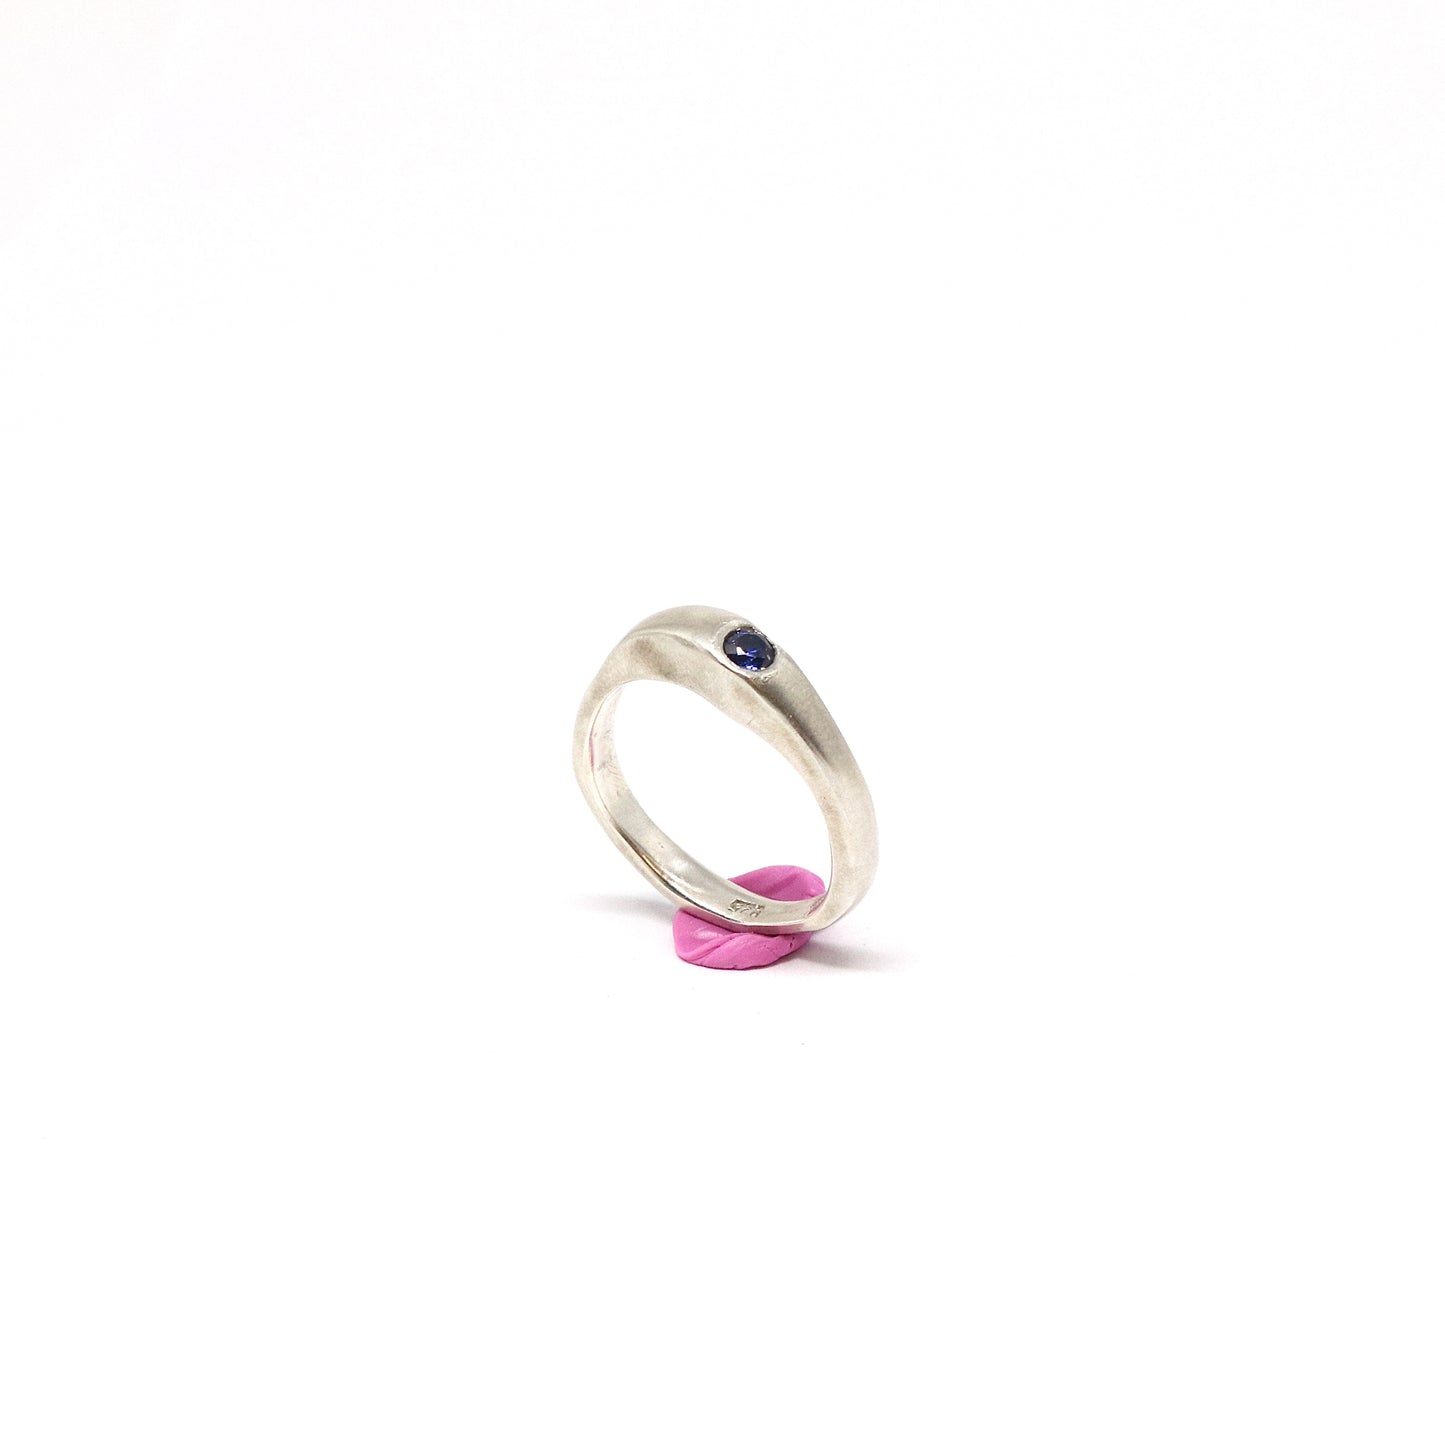 Wonky Ring - Sterling Silver & Sapphire Cubic Zirconia (Size N 1/2) (R161)